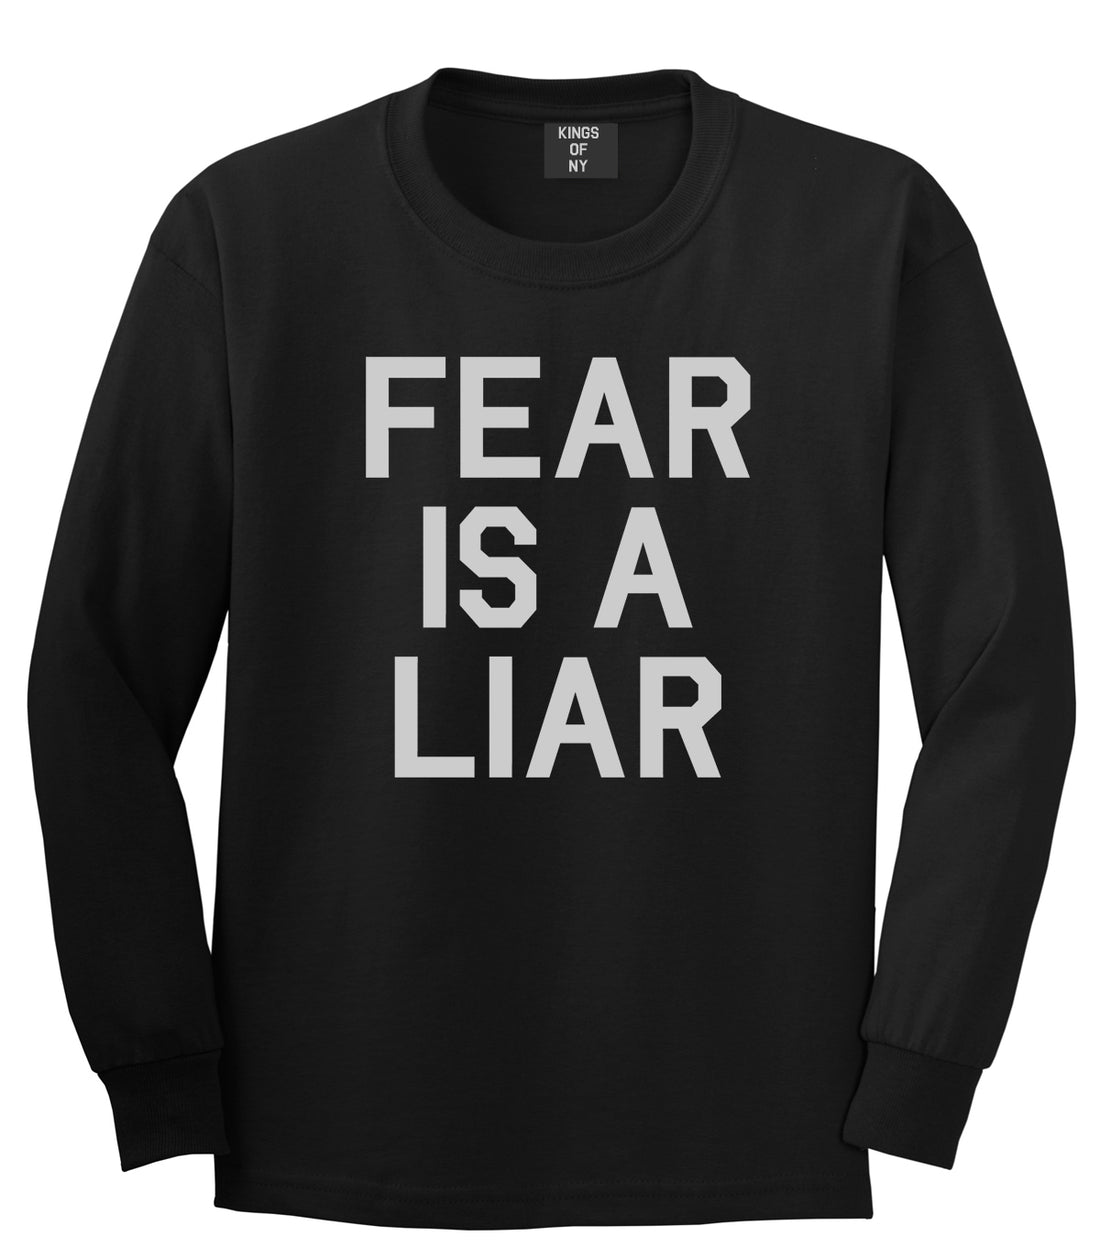 Fear Is A Liar Motivational Mens Long Sleeve T-Shirt Black by Kings Of NY